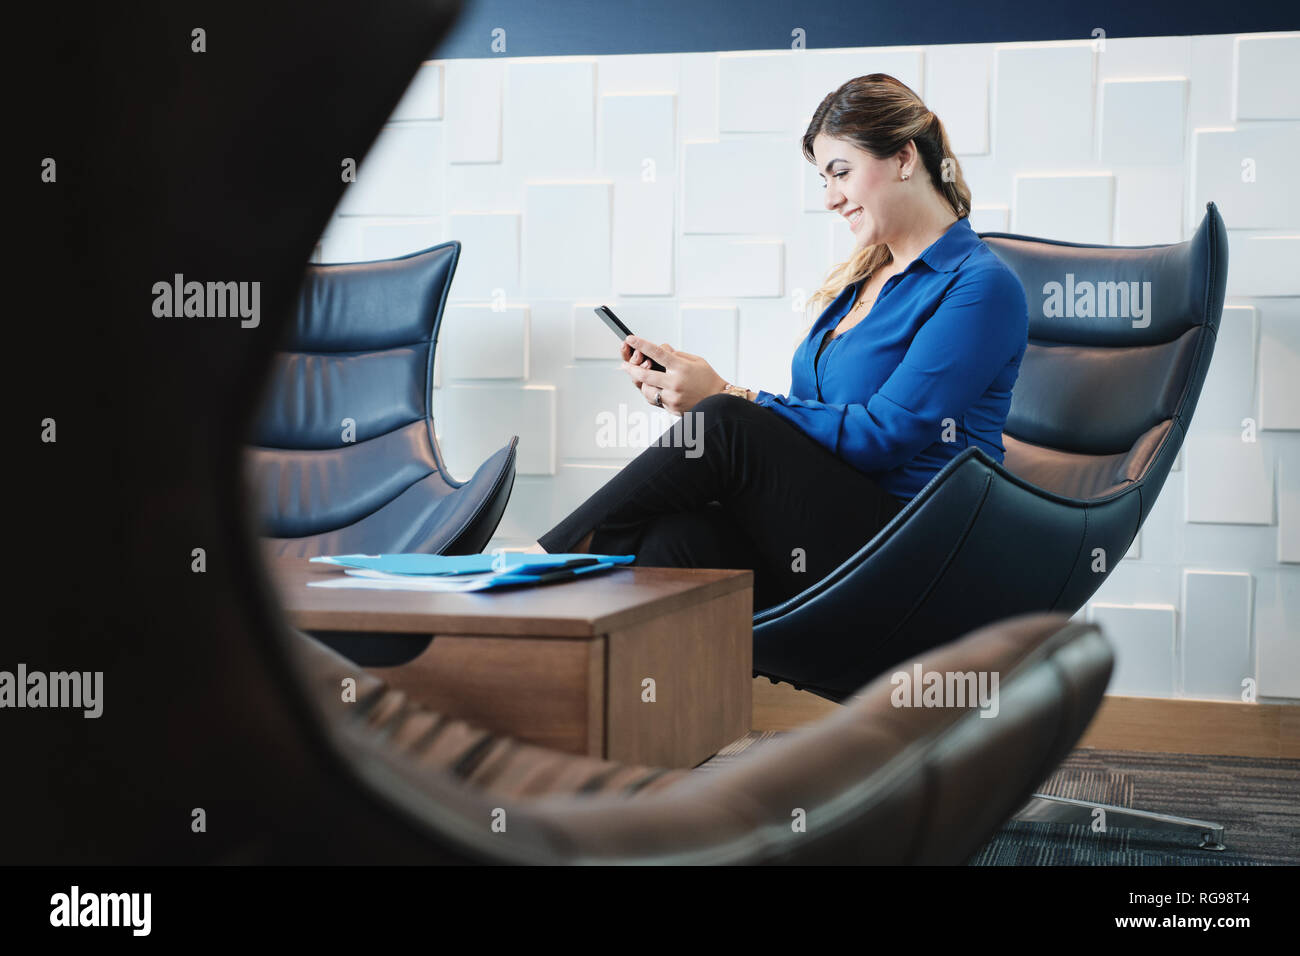 Happy Business Woman With Smartphone Sitting In Office Waiting Room Stock Photo